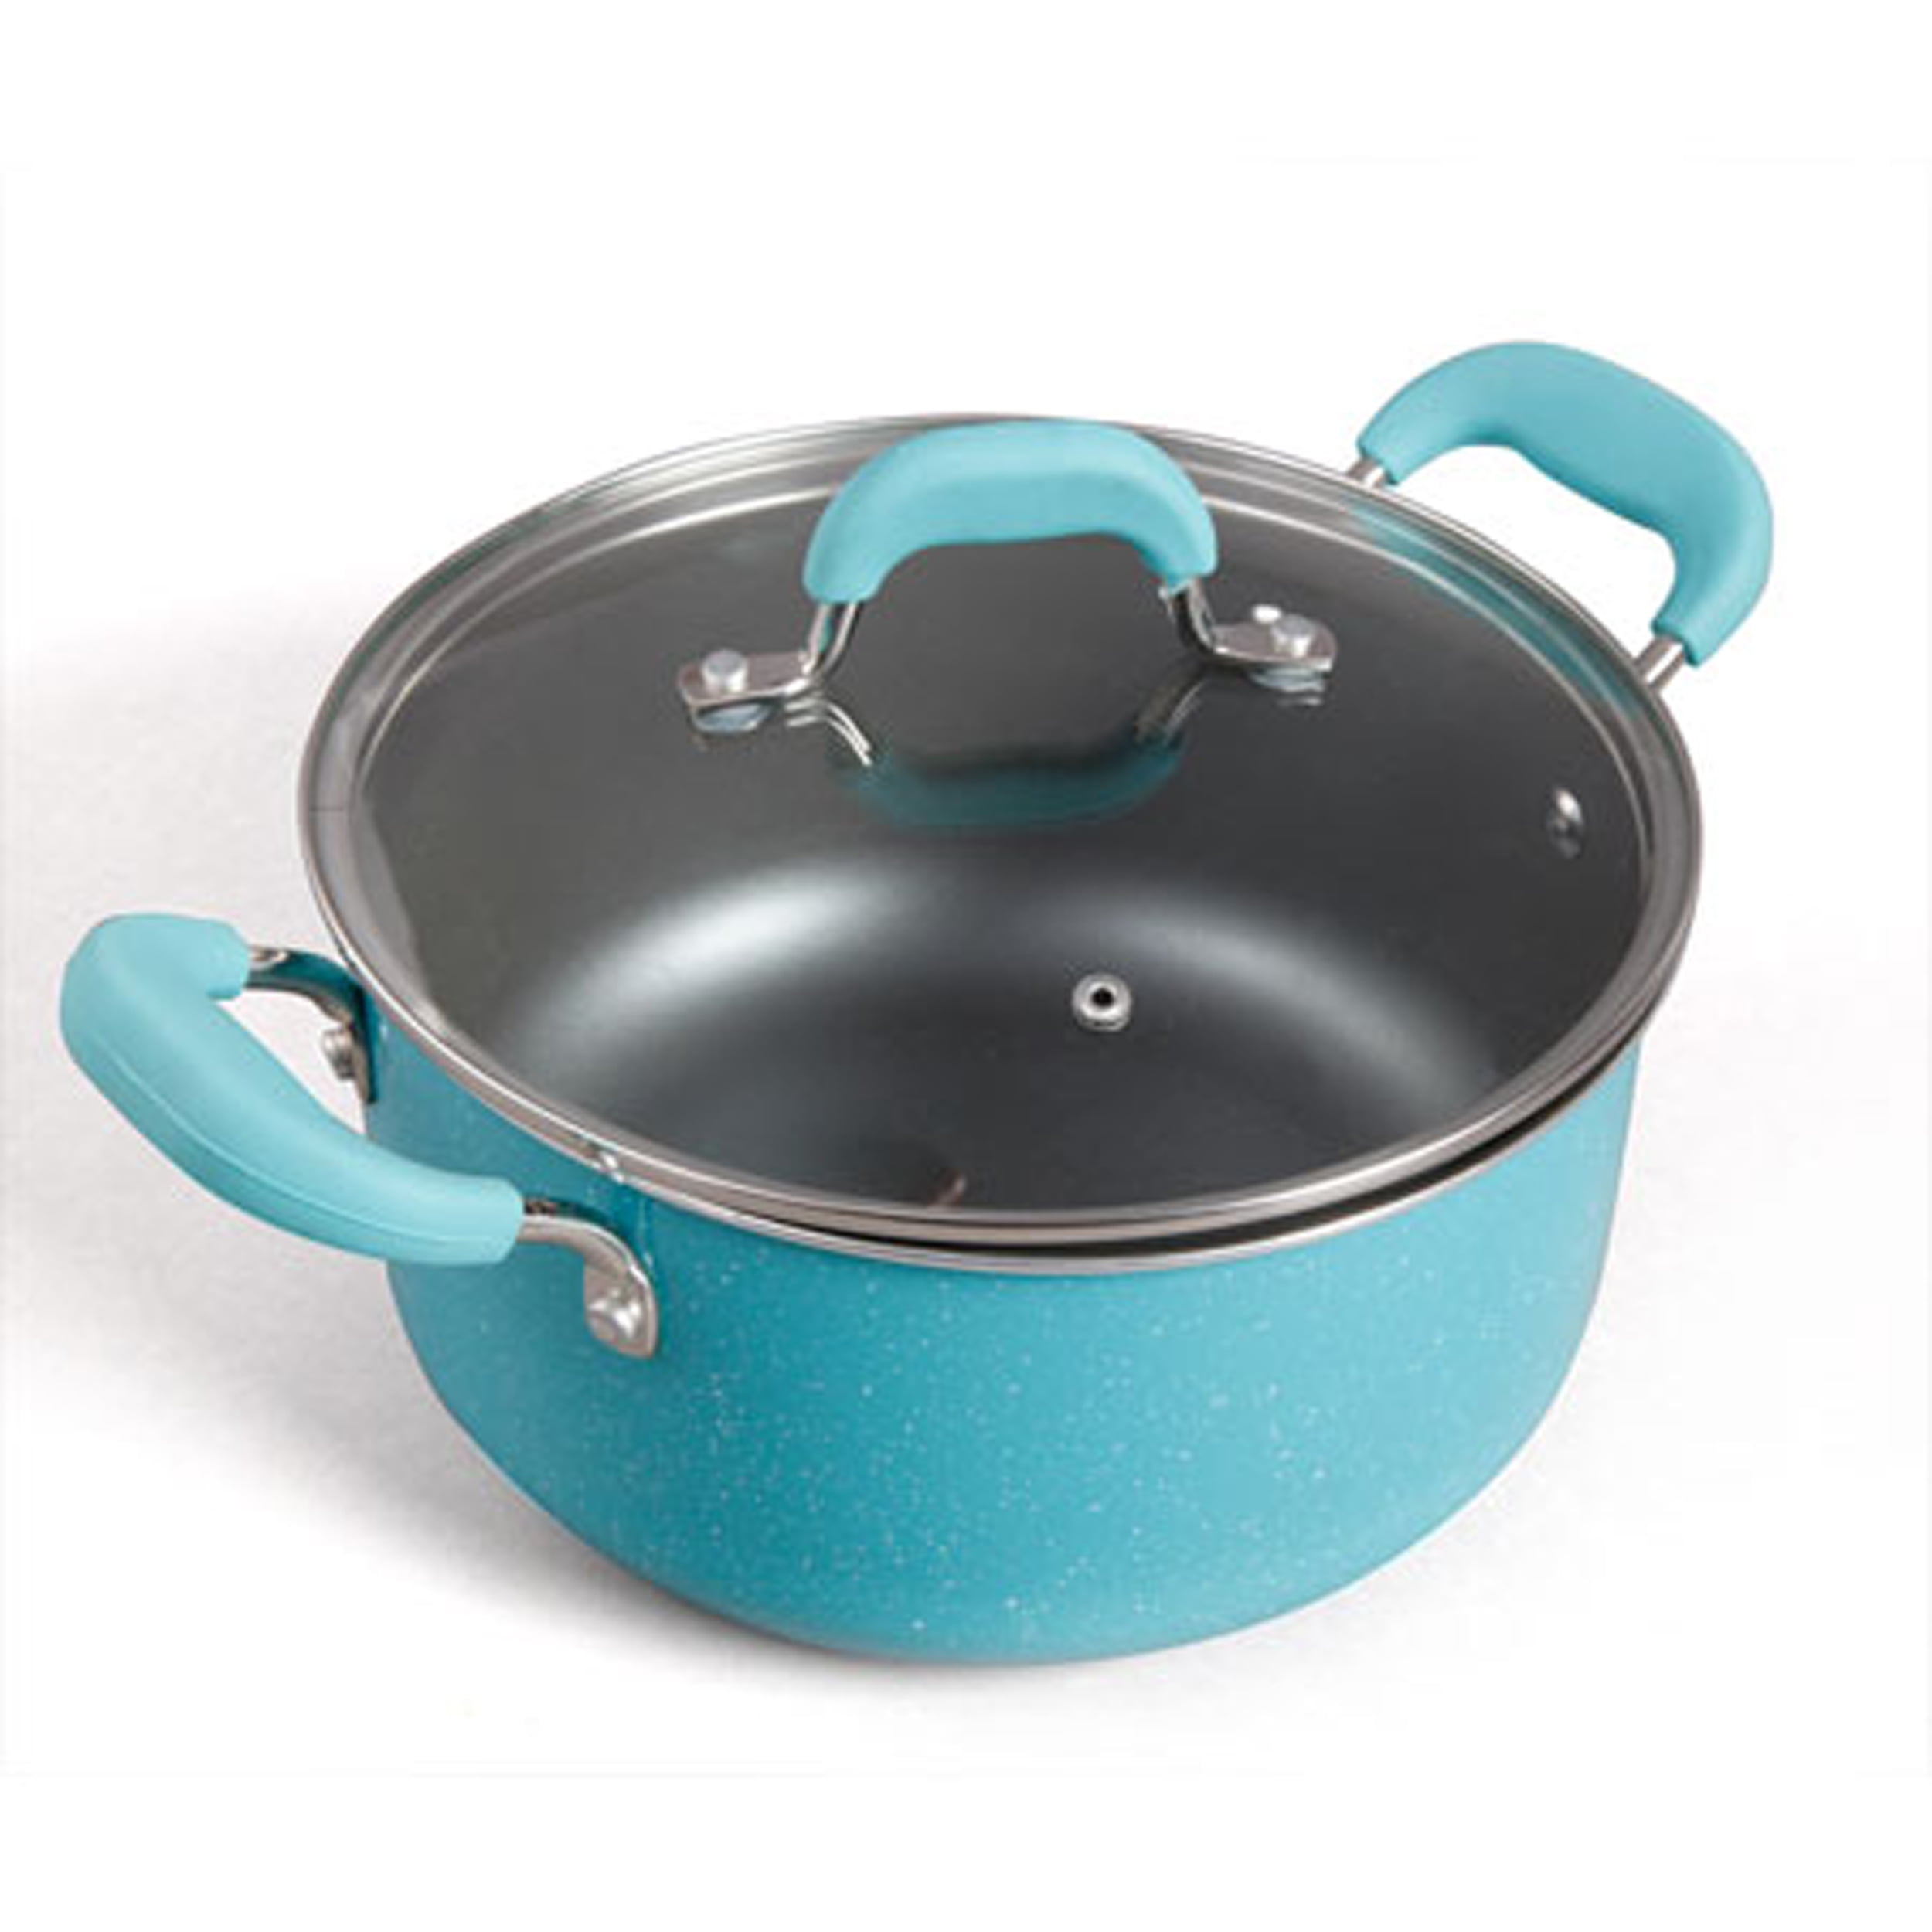 The Pioneer Woman Sweet Romance 30-Piece Nonstick Cookware Set, Turquoise 